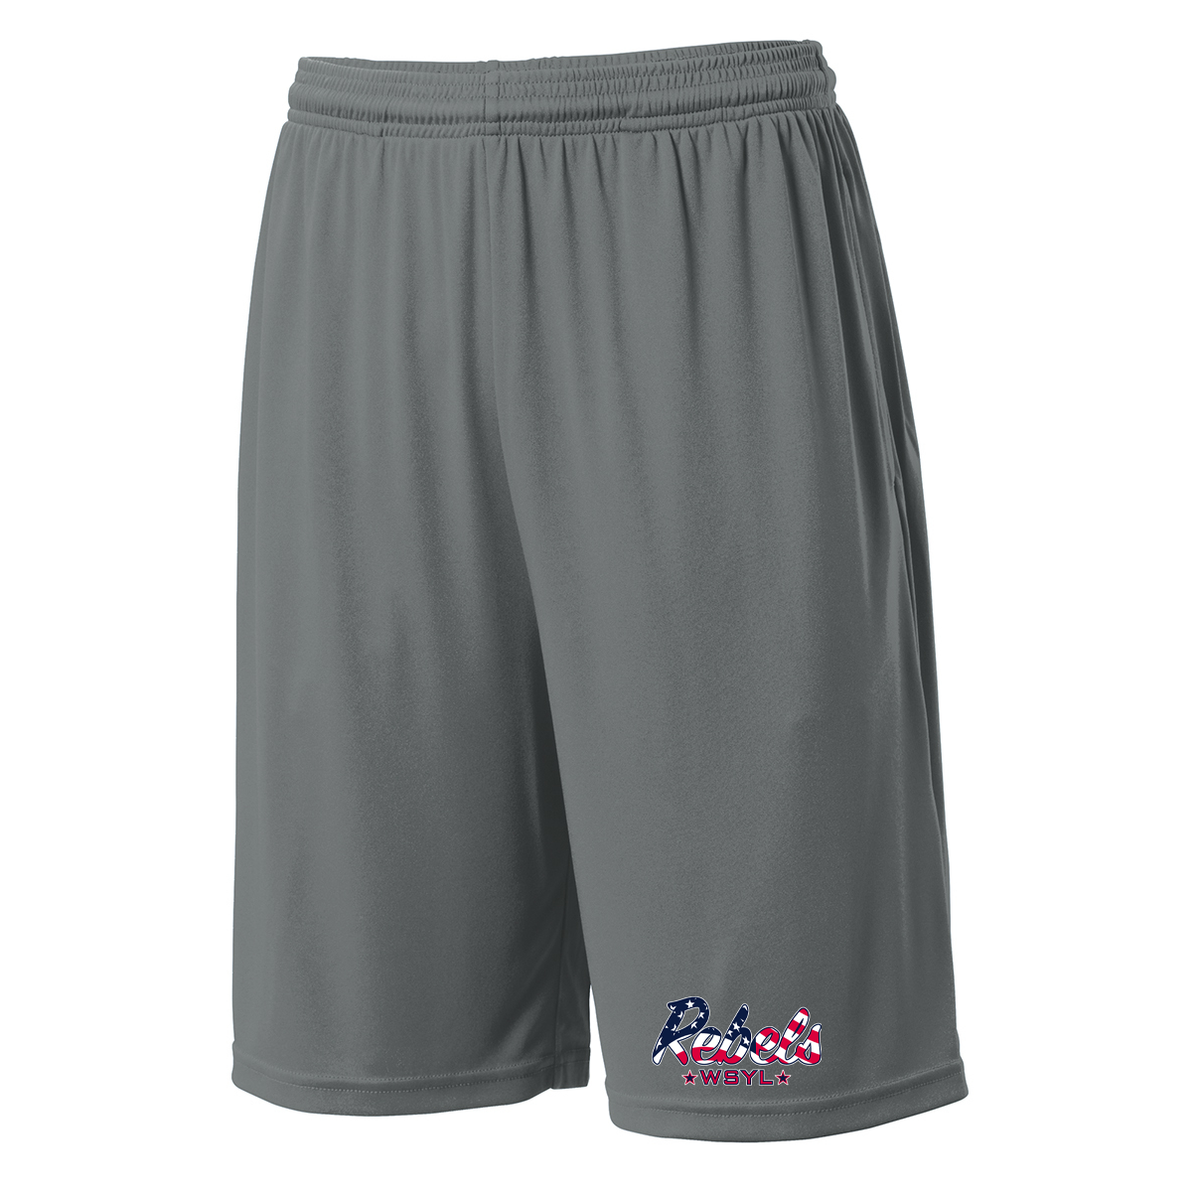 Rebels World Series Youth League Shorts